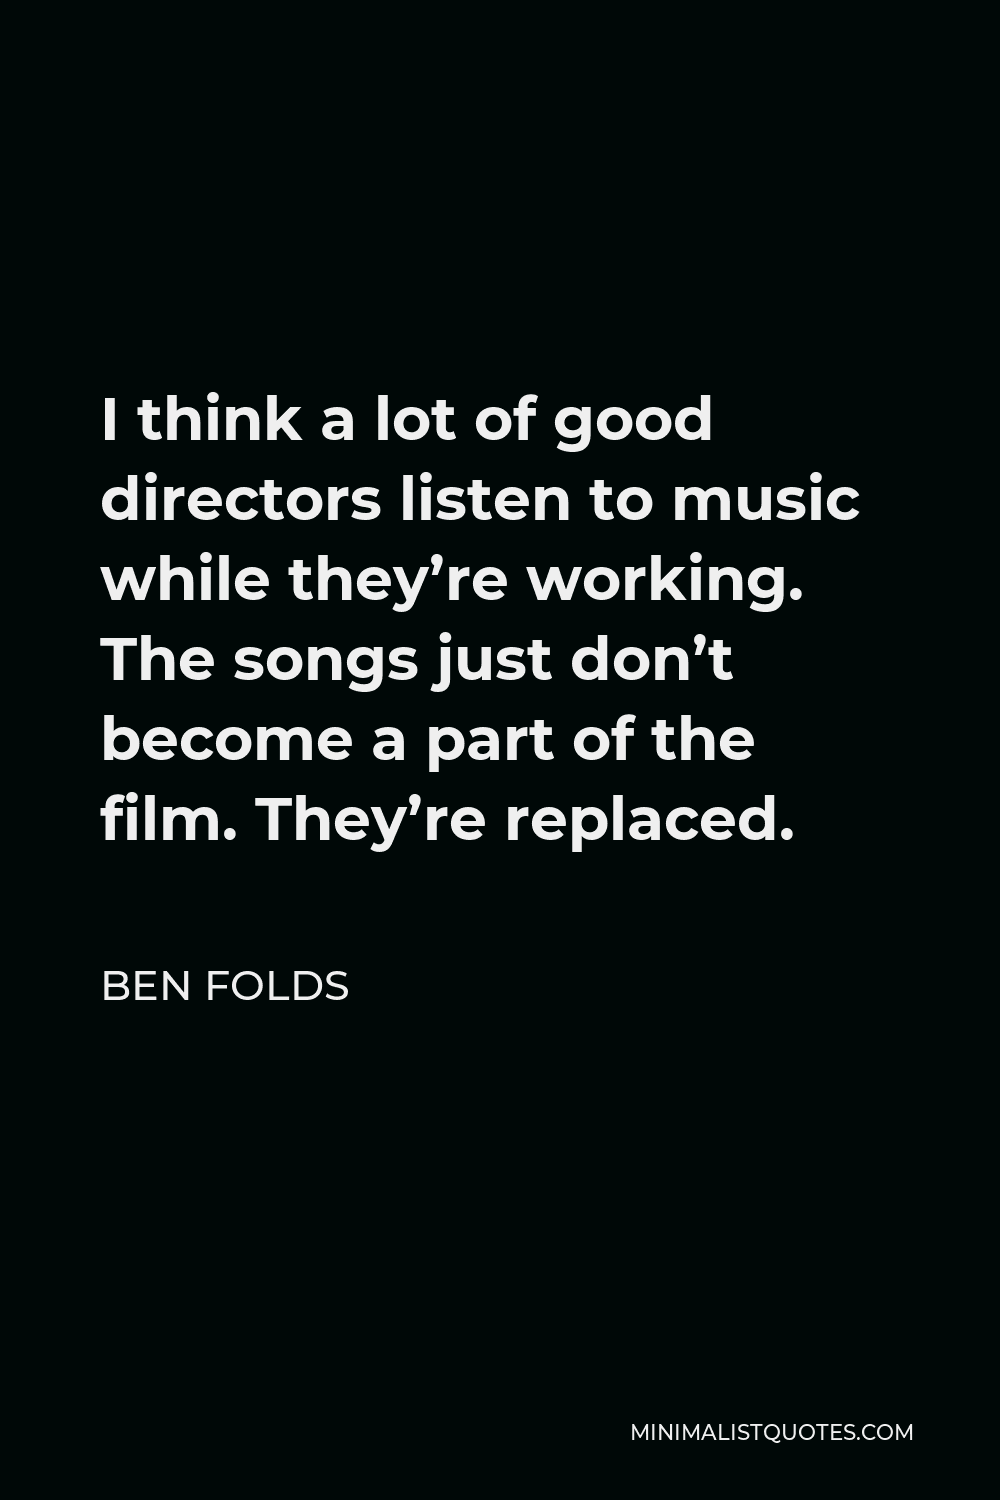 Ben Folds Quote - I think a lot of good directors listen to music while they’re working. The songs just don’t become a part of the film. They’re replaced.